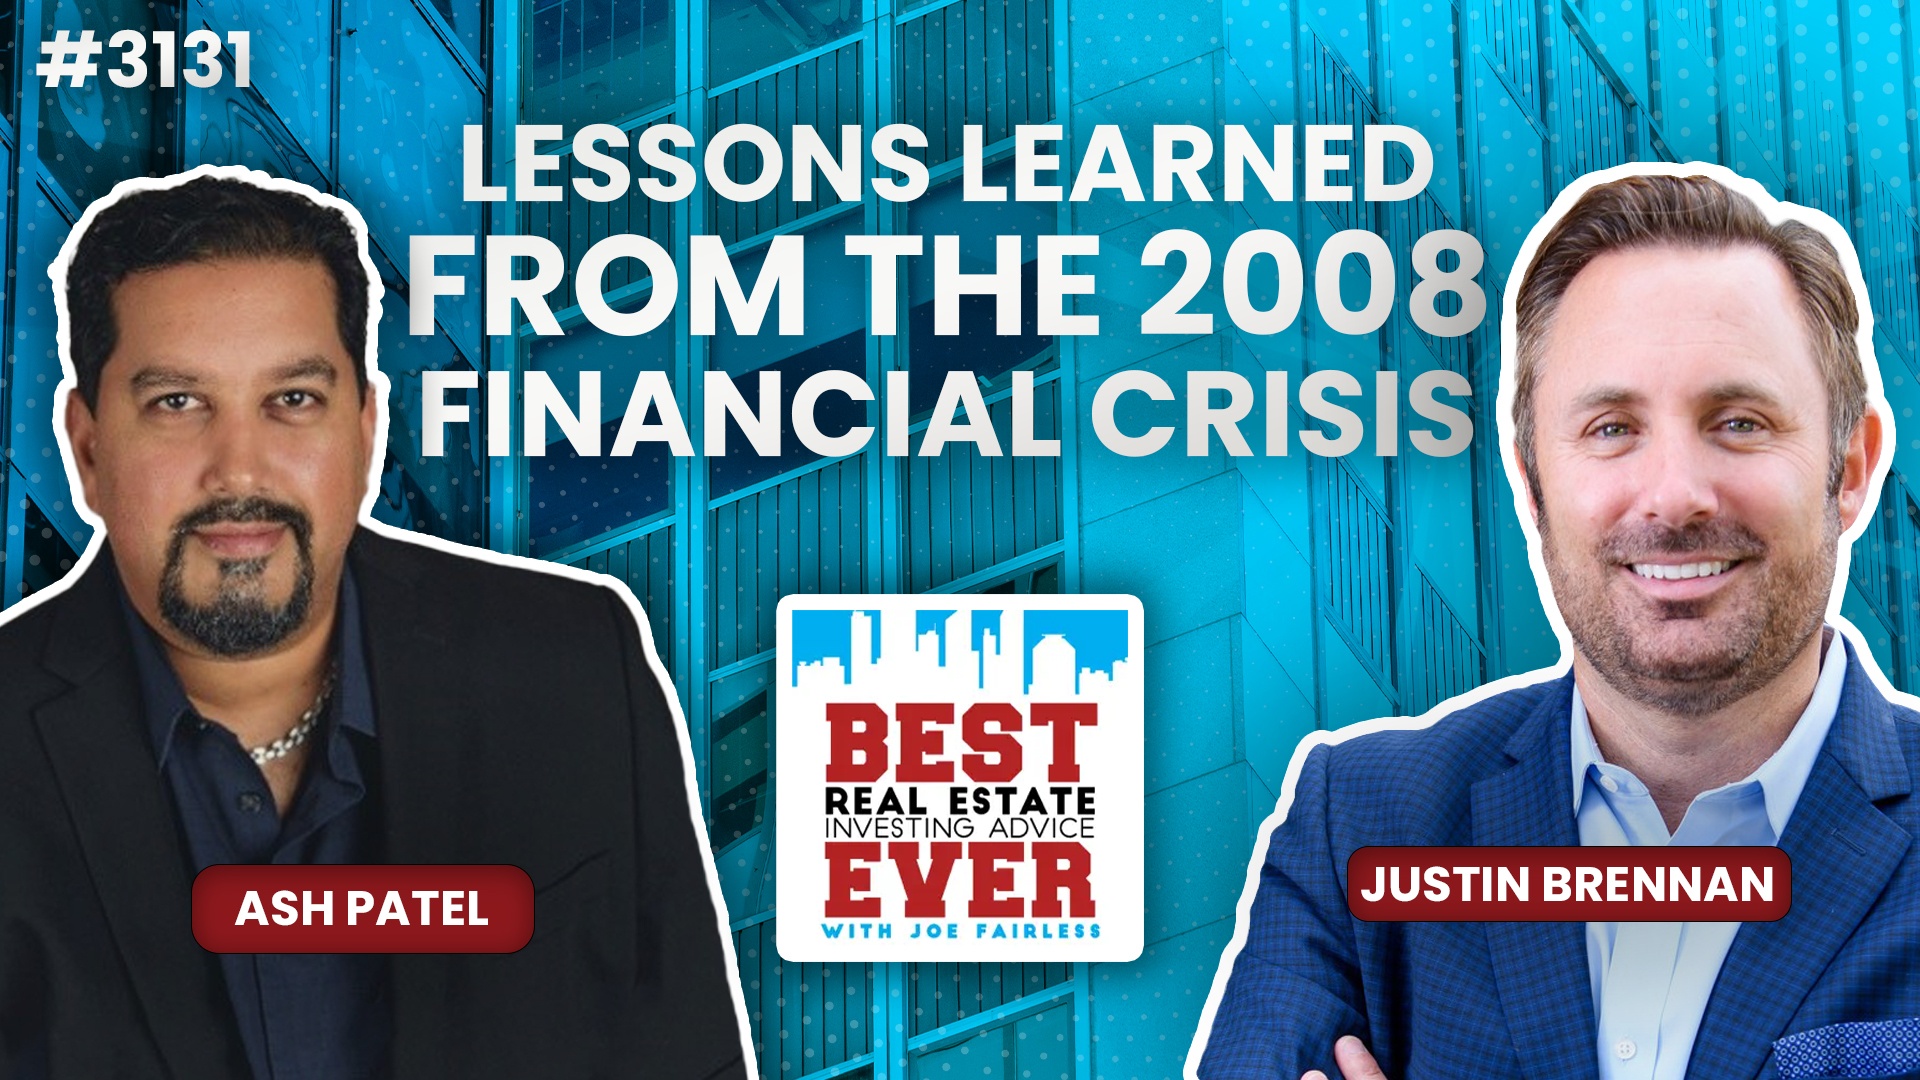 JF3131: Lessons Learned from the 2008 Financial Crisis ft. Justin Brennan